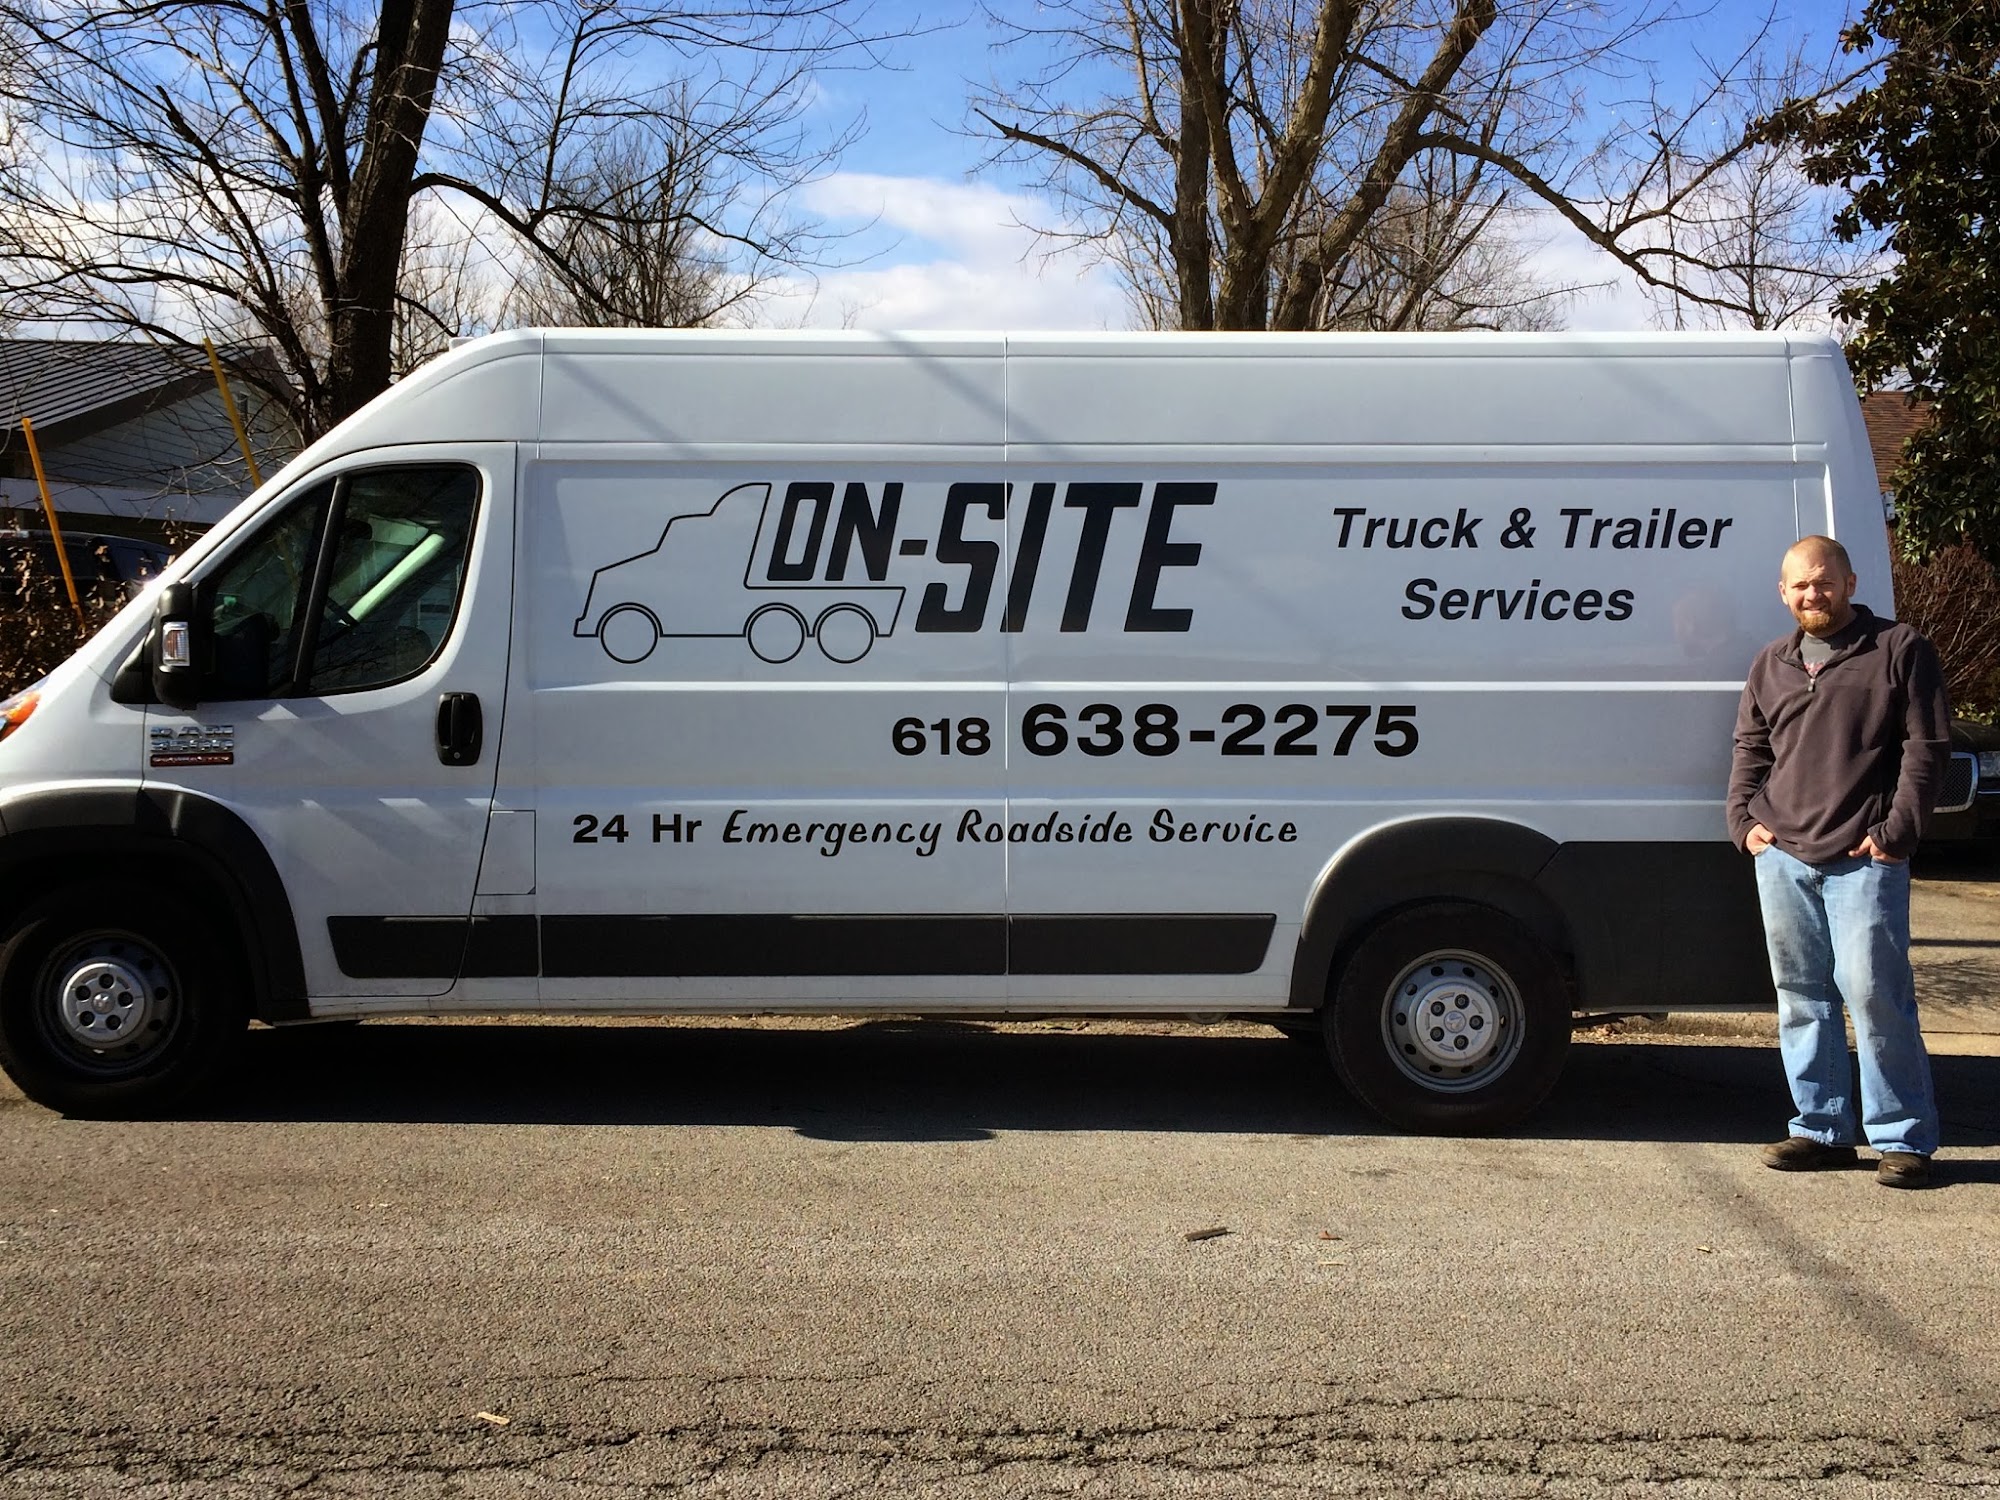 On-Site Truck and Trailer Services